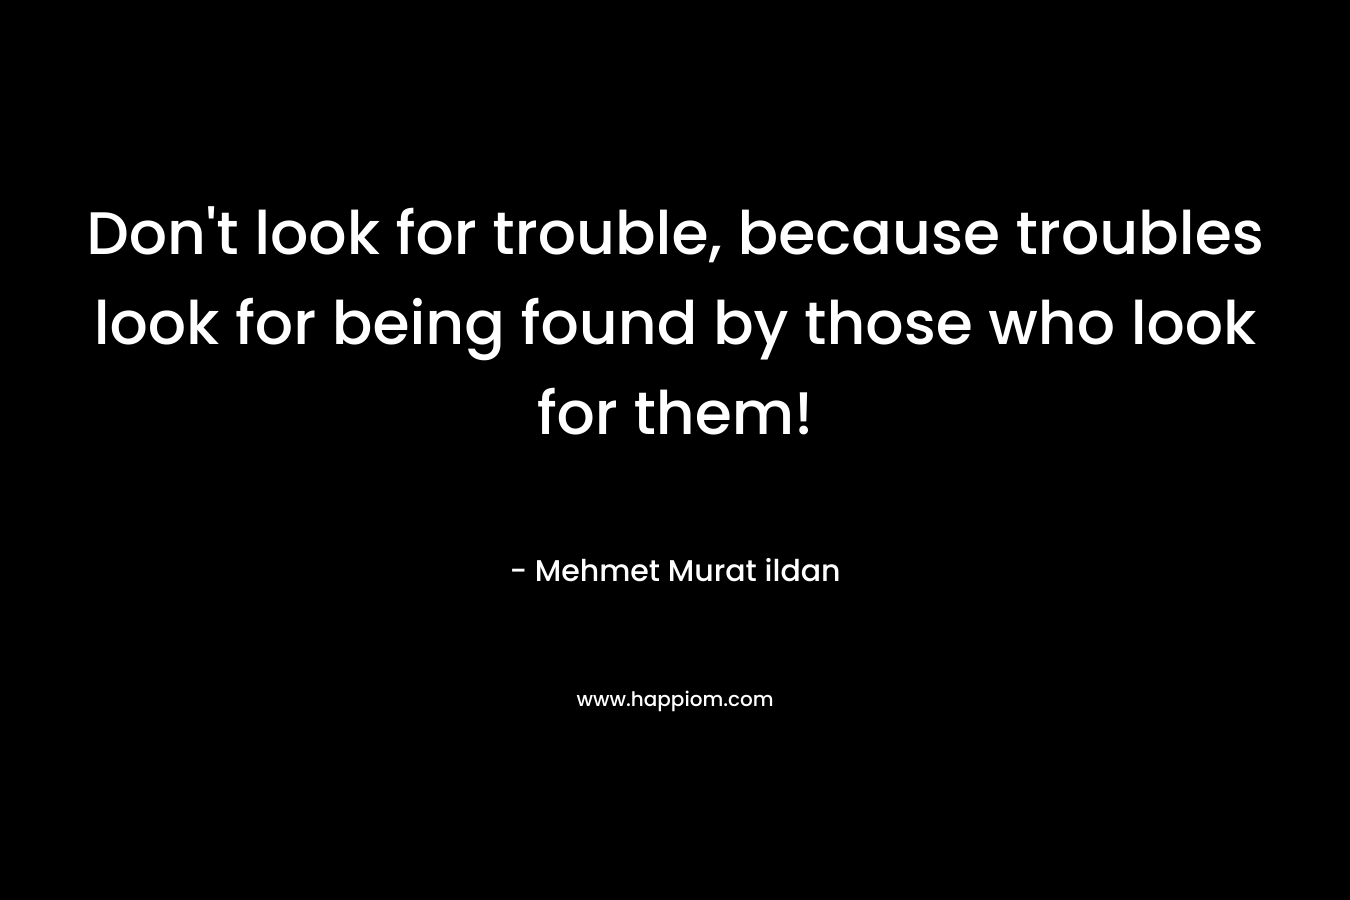 Don’t look for trouble, because troubles look for being found by those who look for them! – Mehmet Murat ildan